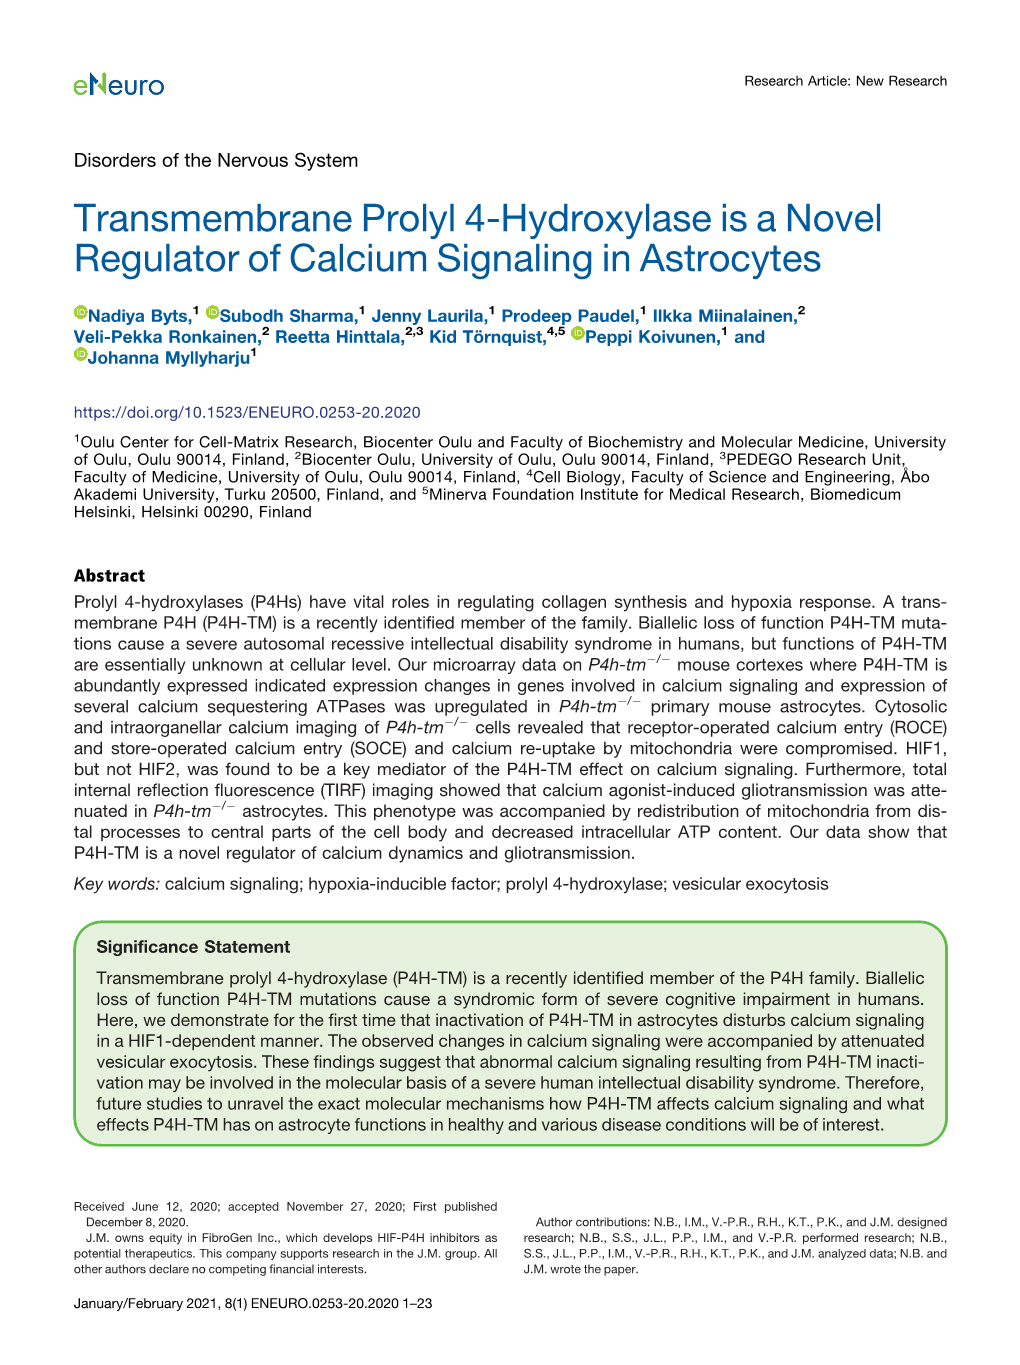 Transmembrane Prolyl 4-Hydroxylase Is a Novel Regulator of Calcium Signaling in Astrocytes